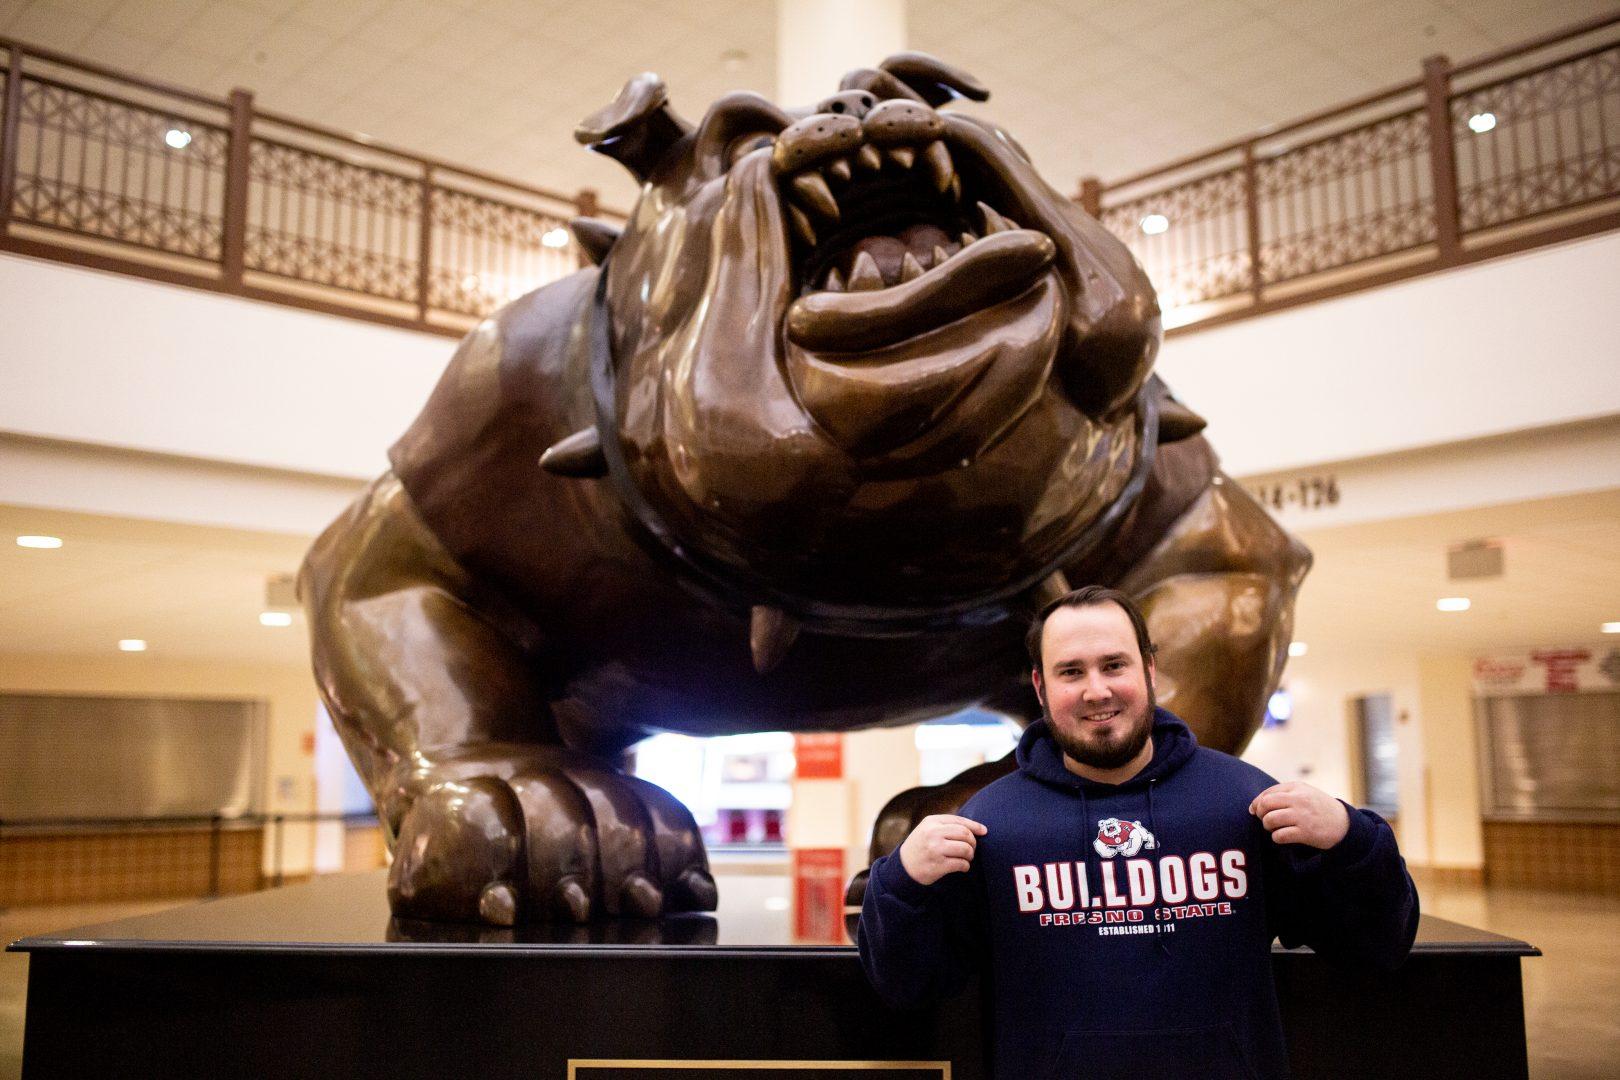 Elliot+Meme%2C+superfan%2C+stands+in+front+of+the+bronze+Bulldog+statue+at+the+Save+Mart+Center+on+Tuesday%2C+Feb.+4%2C+2020.+%28Armando+Carreno%2FThe+Collegian%29